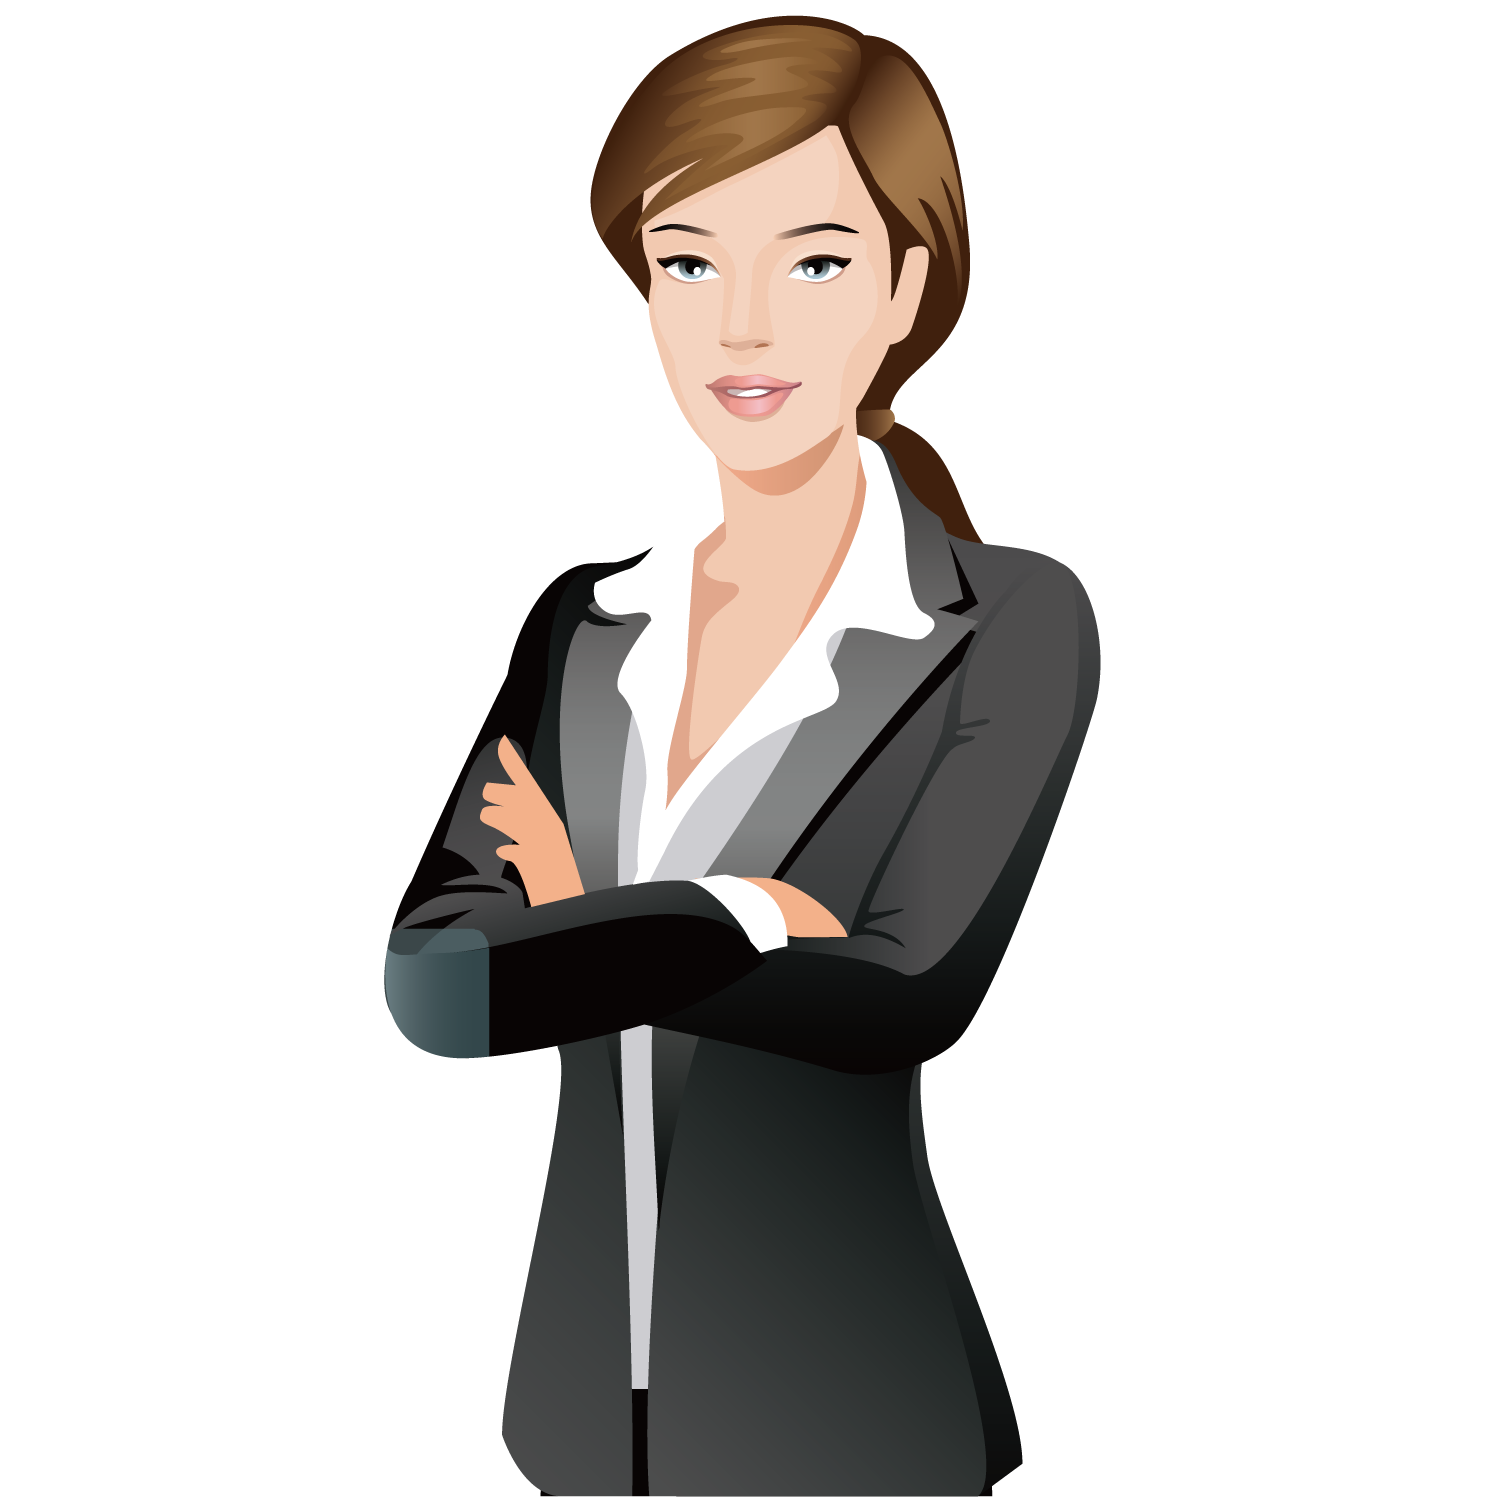 Businessperson Cartoon Silhouette - Business woman png download - 1500*